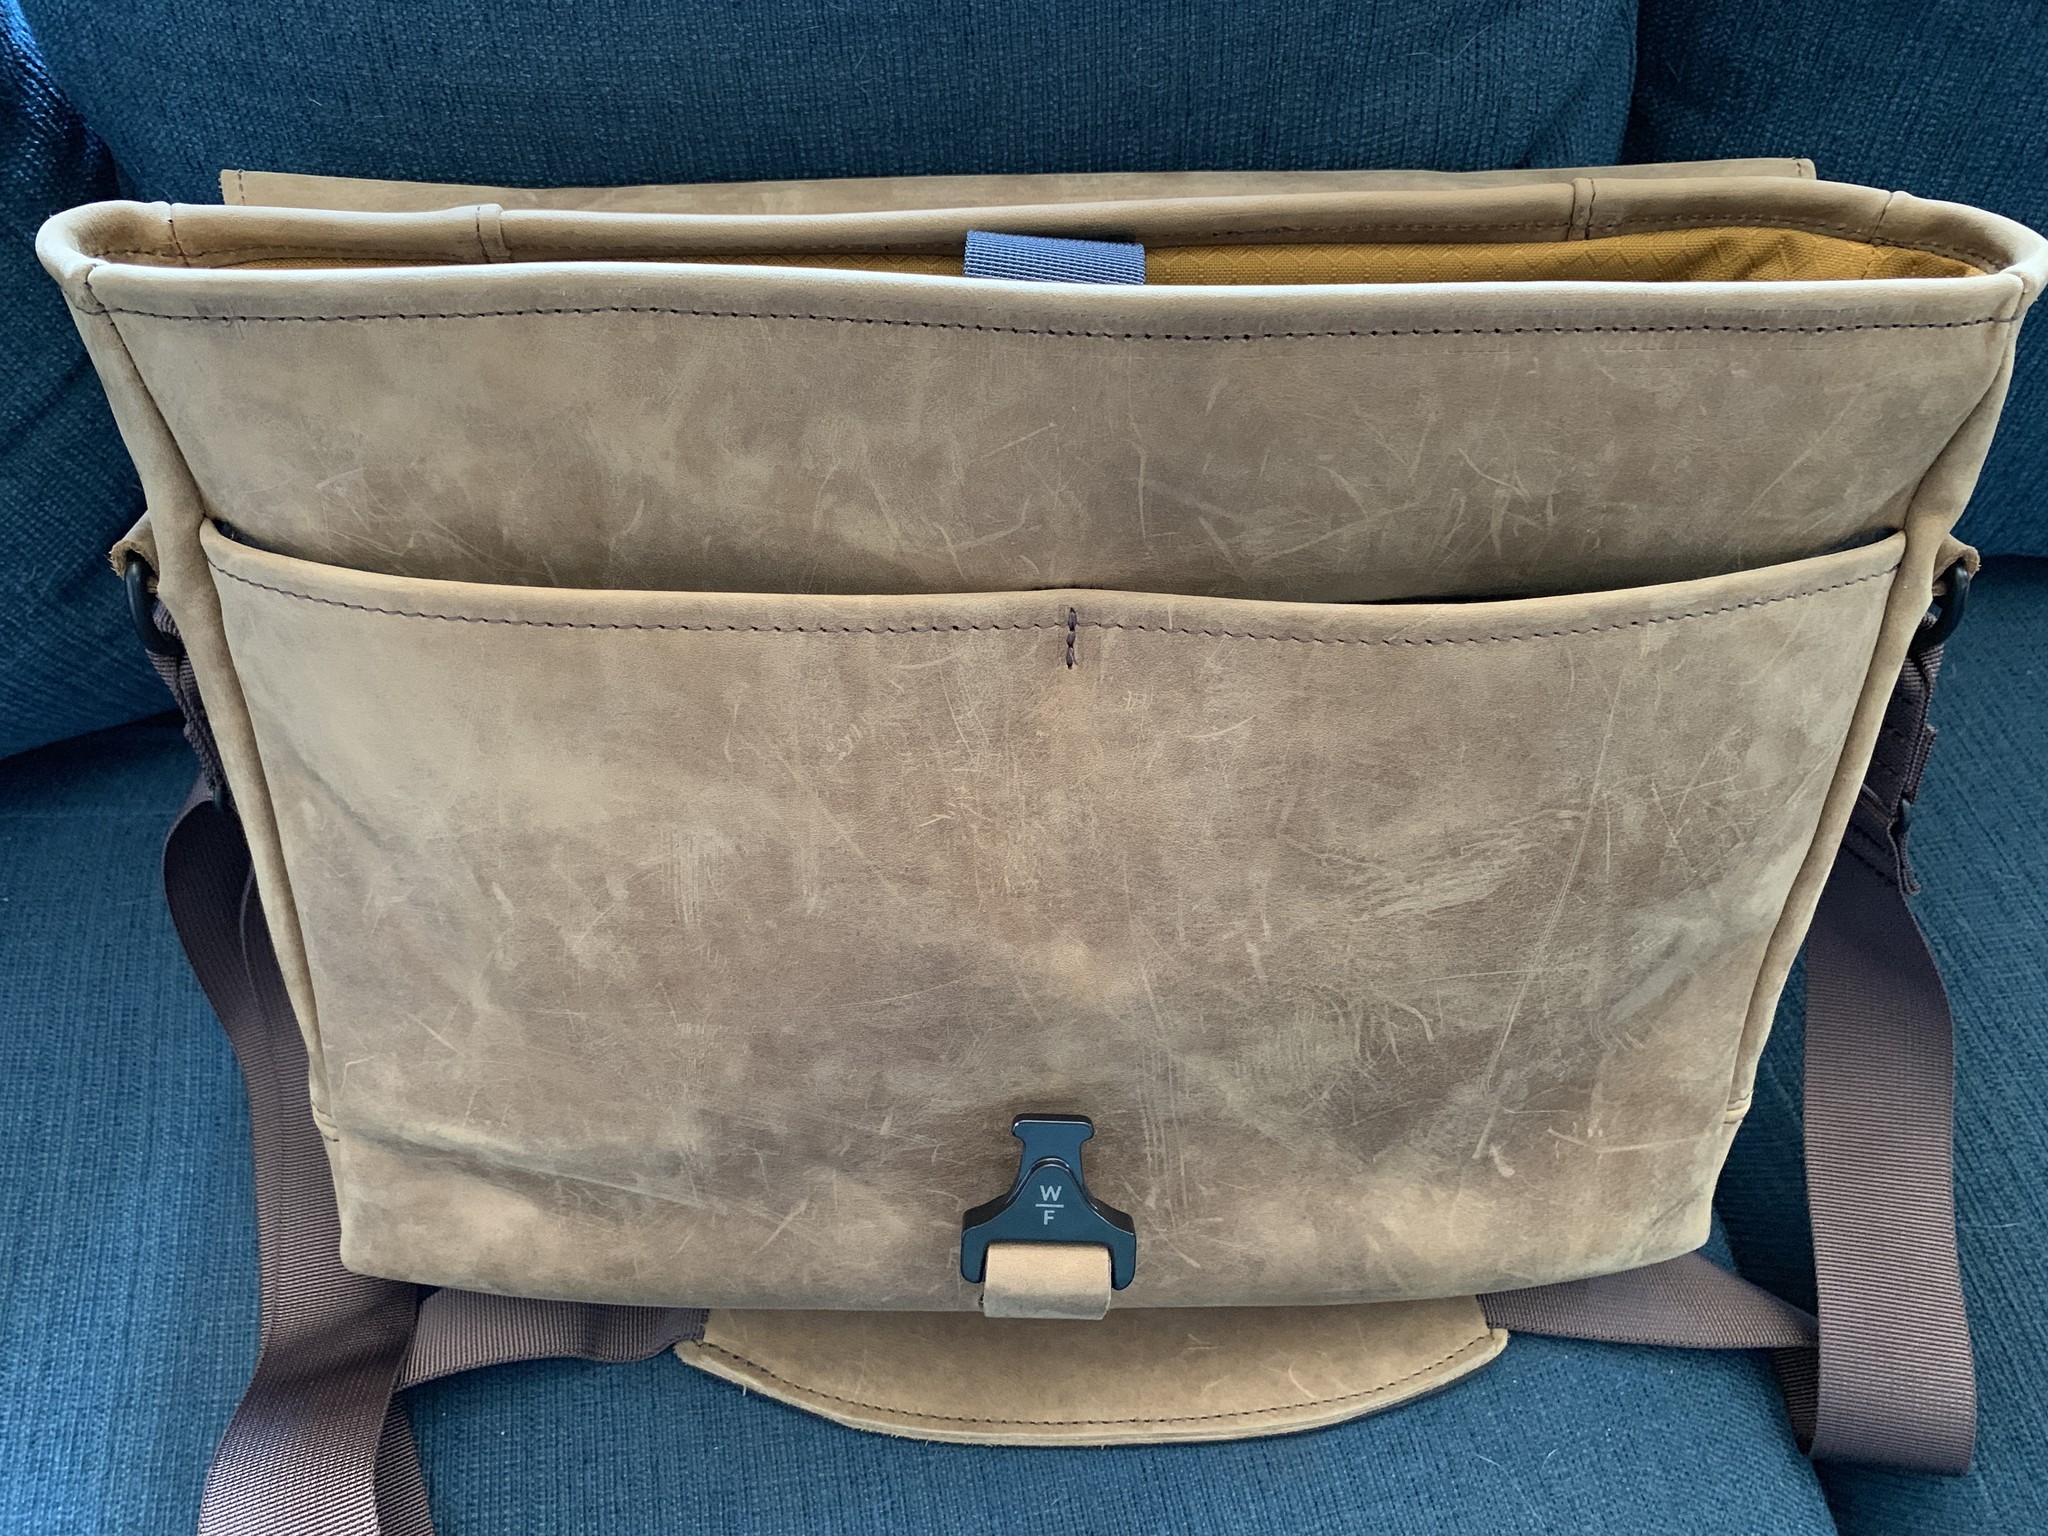 Waterfield Designs Executive Leather Messenger front pockets